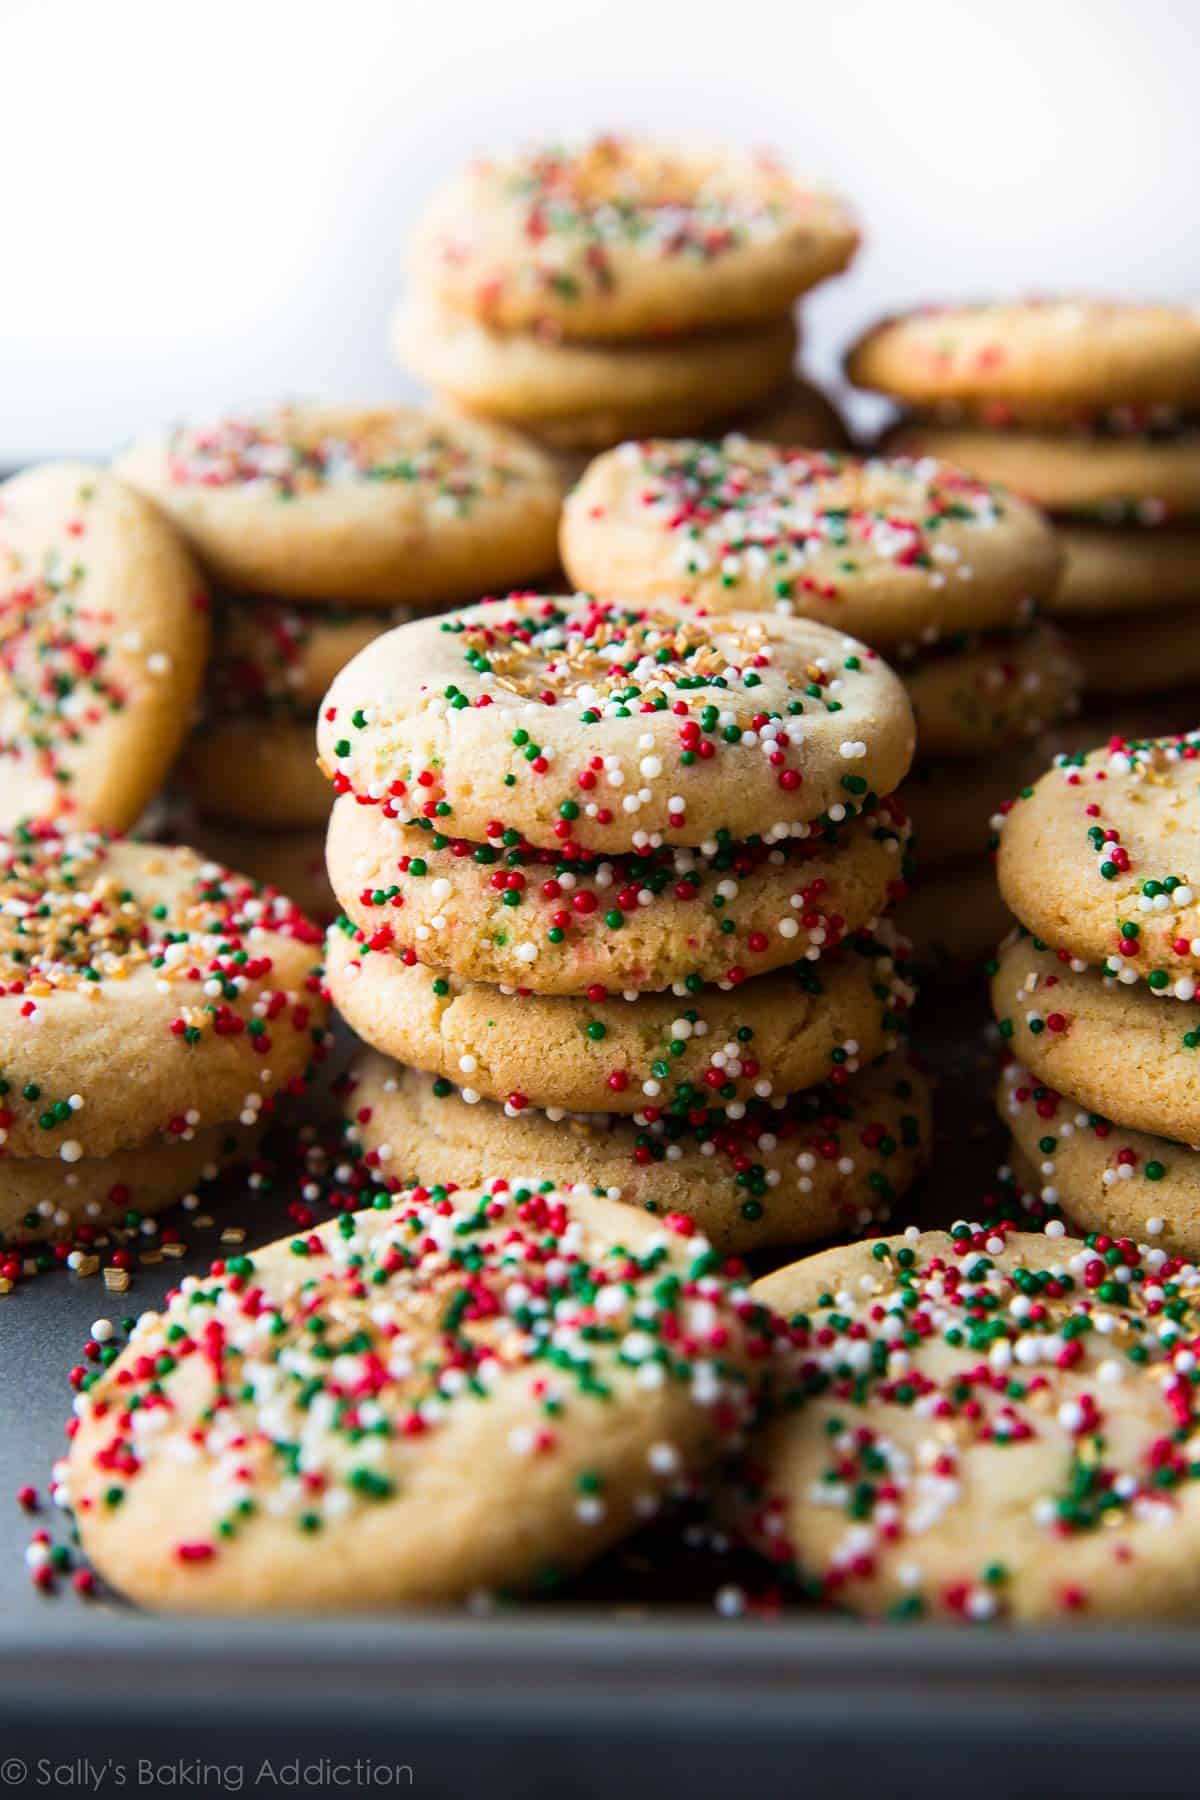 Best Recipes For Sallys Baking Addiction Sugar Cookies Easy Recipes To Make At Home 